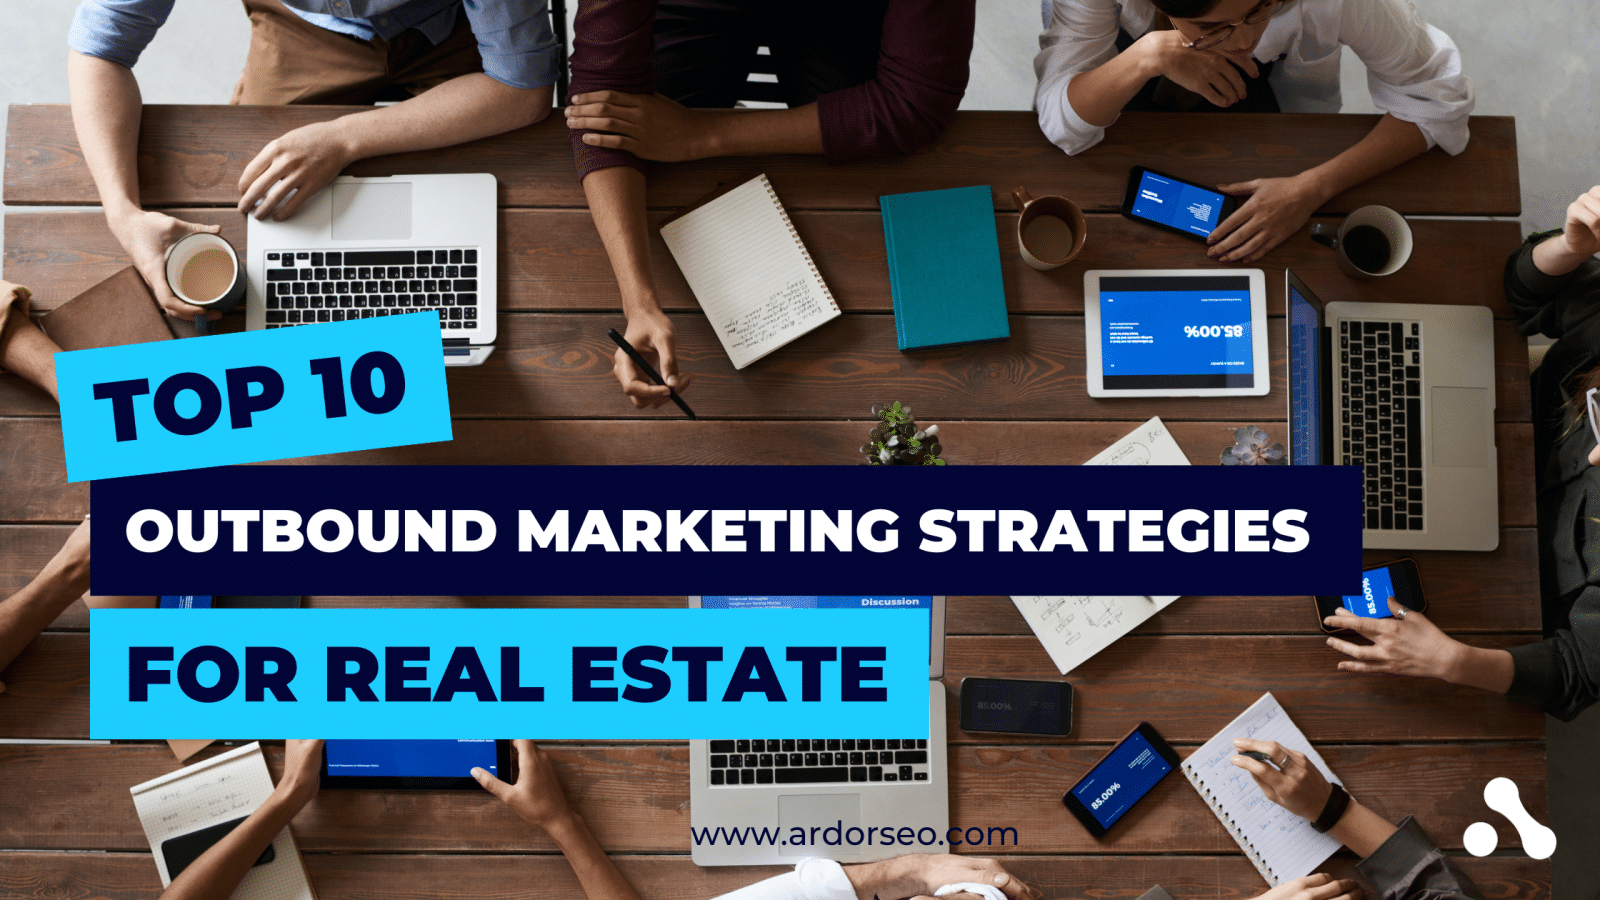 A group of real estate agents mapping out inbound and outbound marketing strategies